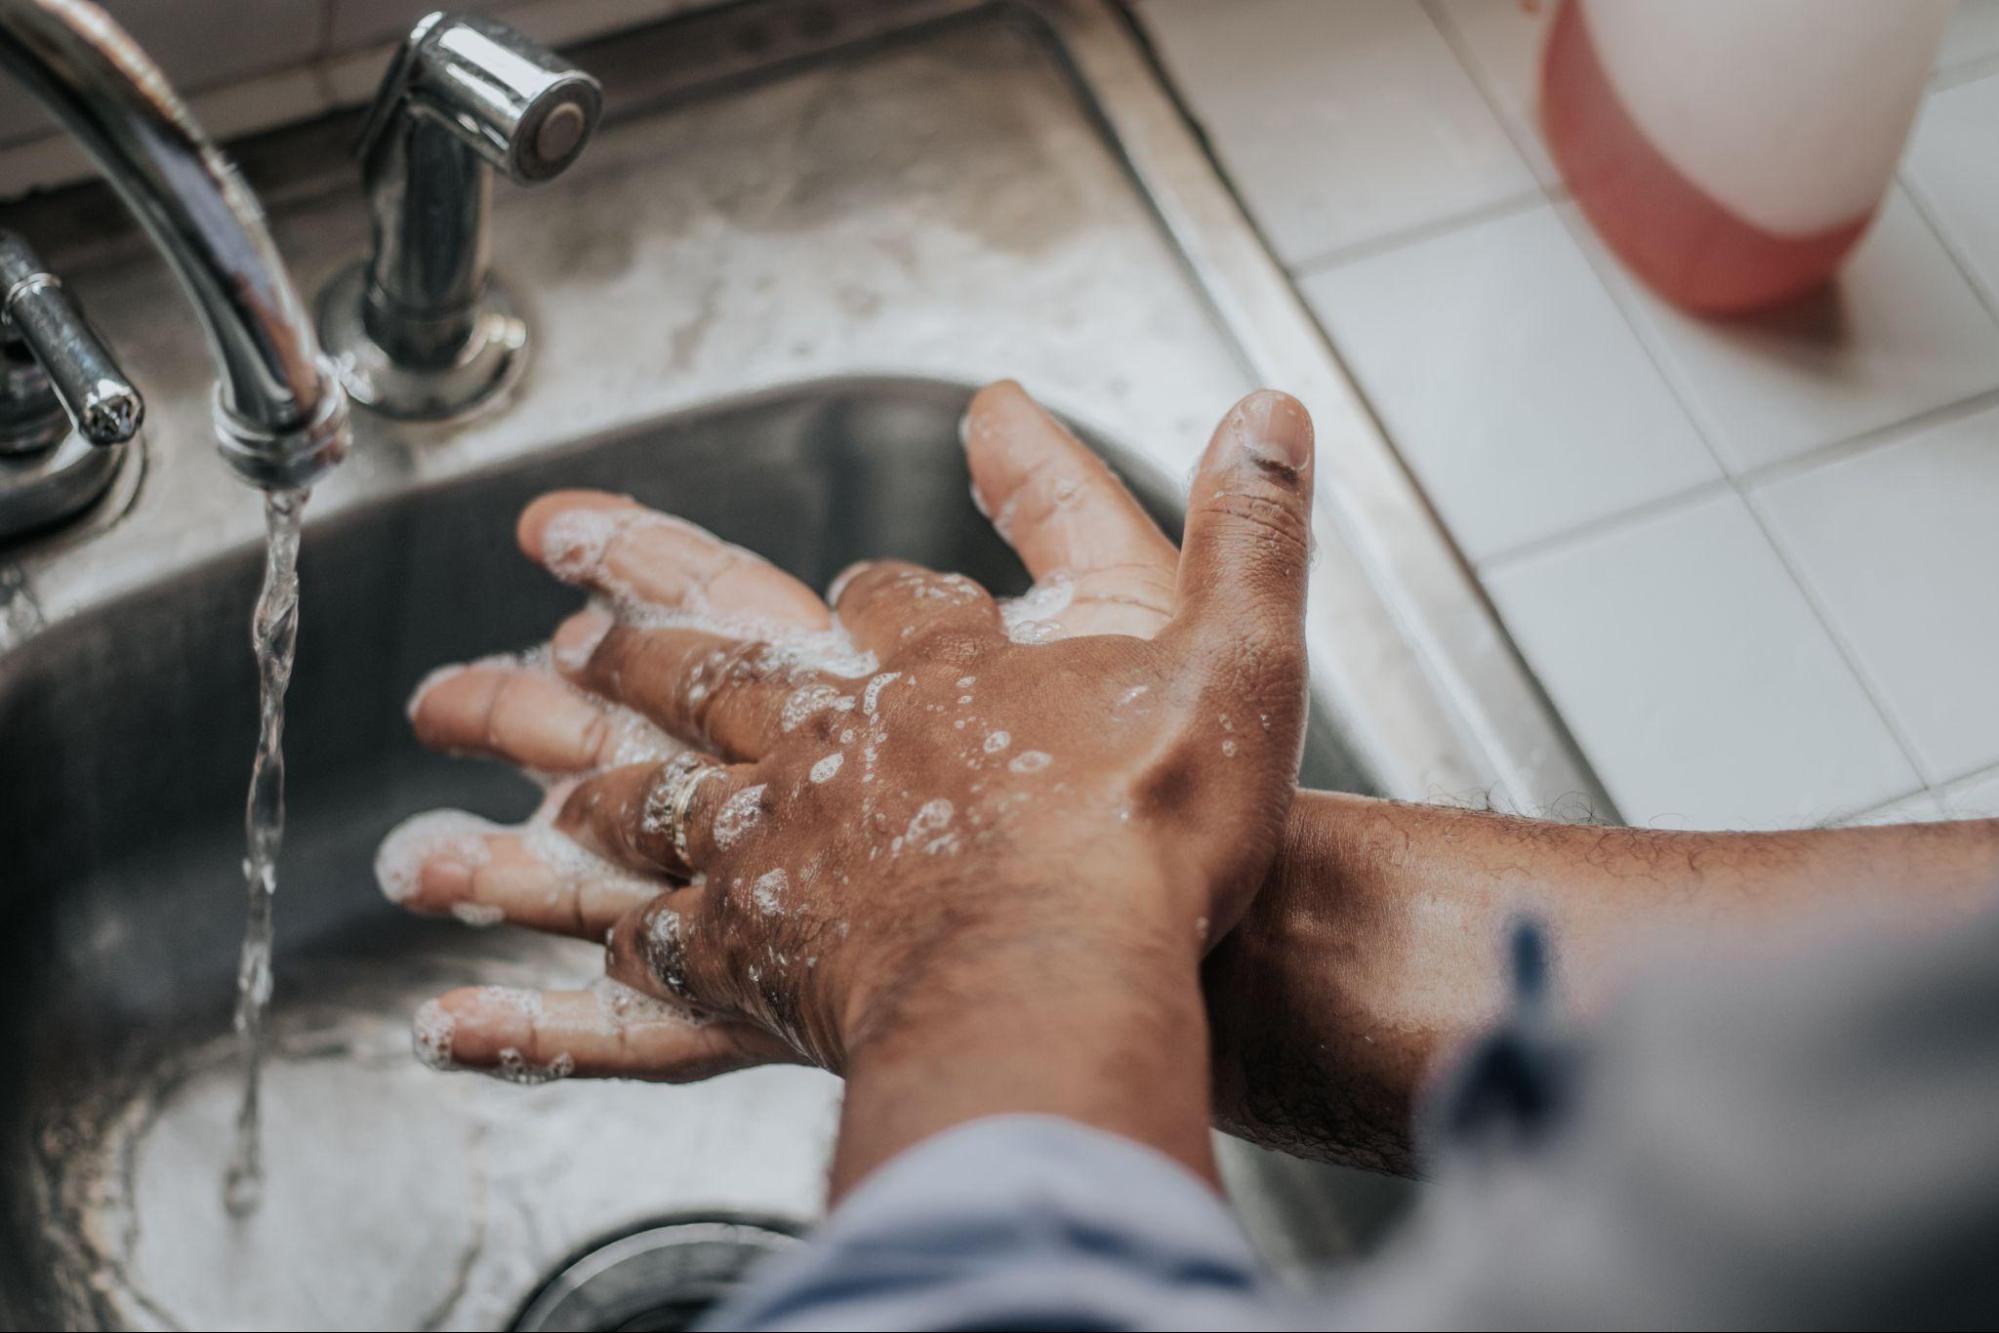  A person washing their hands at the kitchen sink.